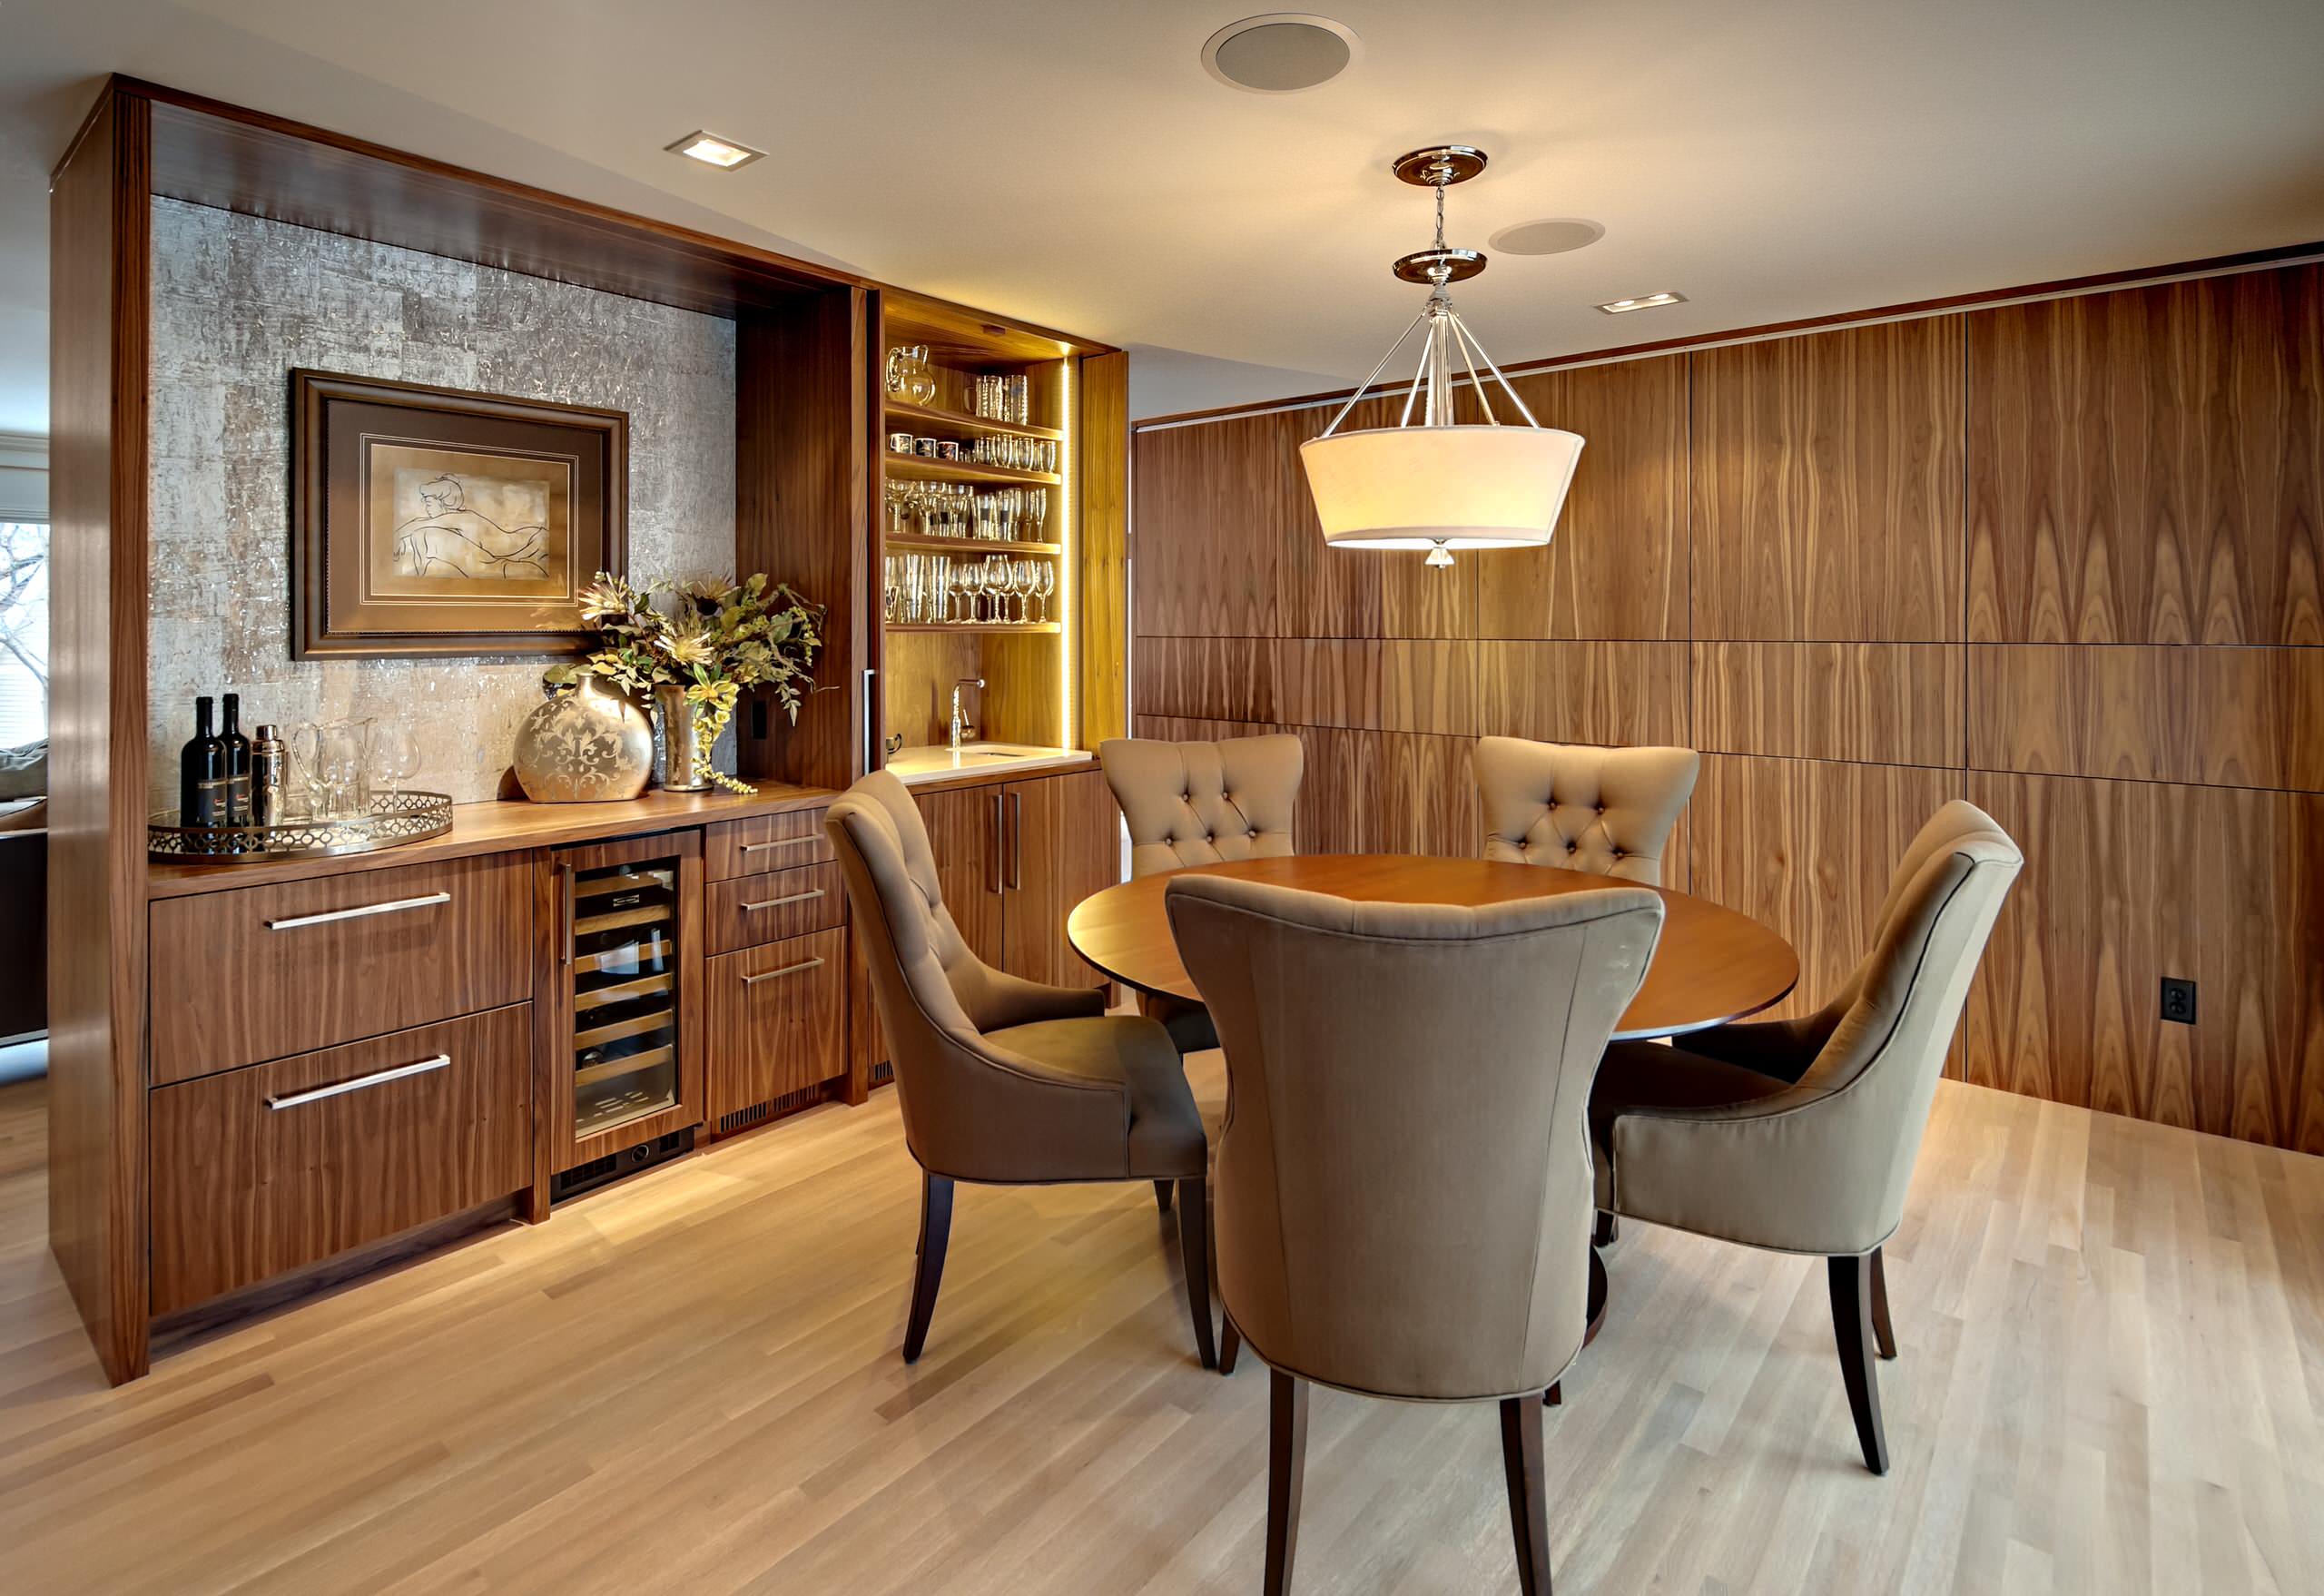 Dining Room Buffet With Wine Cooler - Photos & Ideas | Houzz